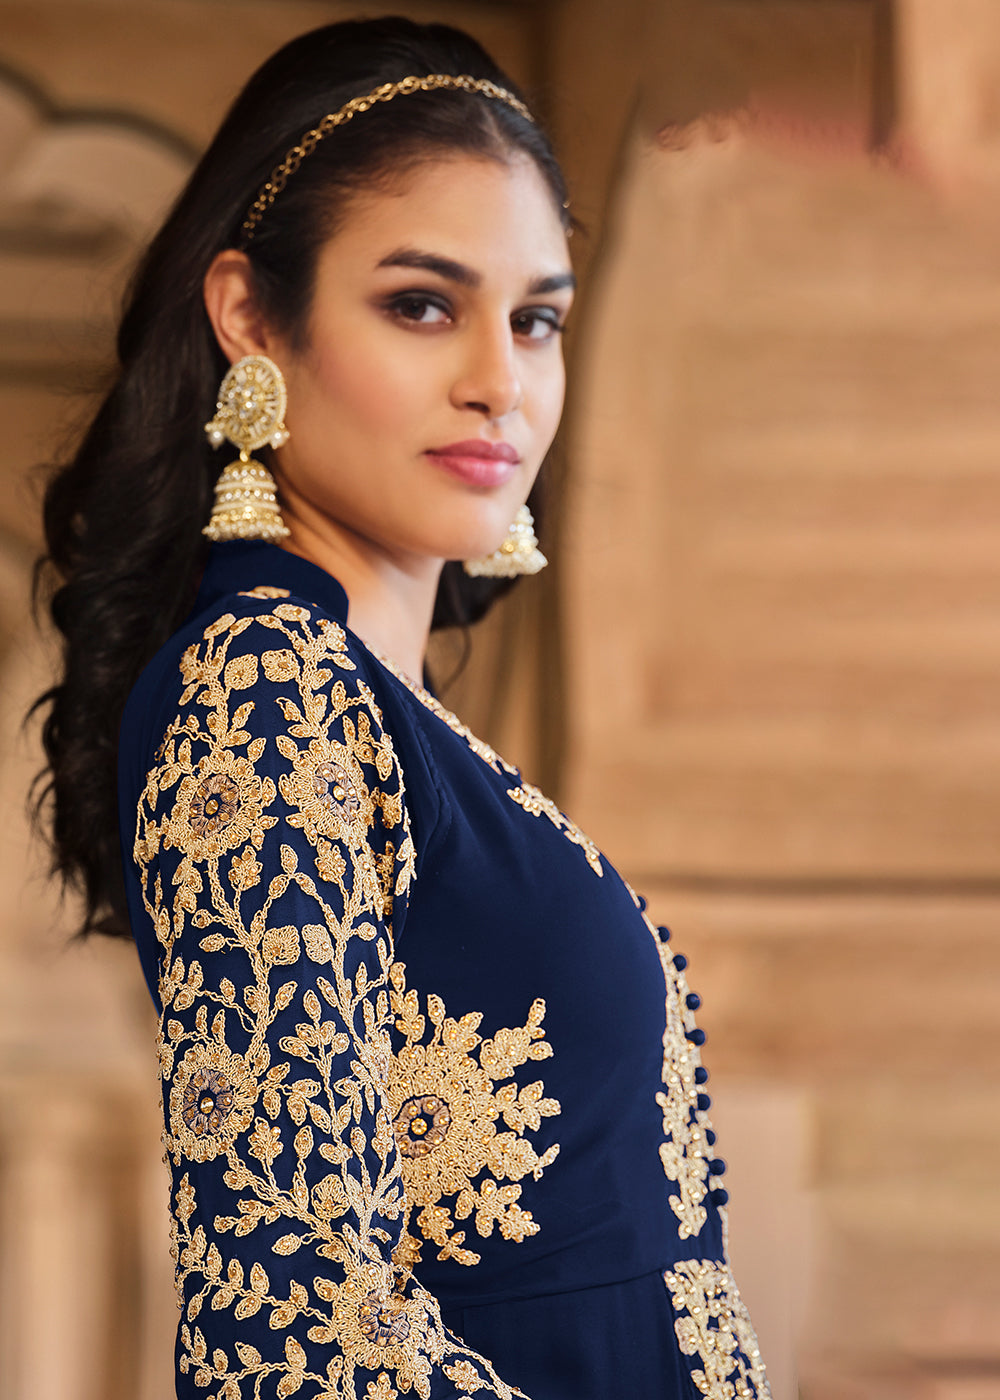 Buy Now Stone Embroidered Solid Navy Blue Slit Style Anarkali Suit Online in USA, UK, Australia, New Zealand, Canada, Italy & Worldwide at Empress Clothing. 